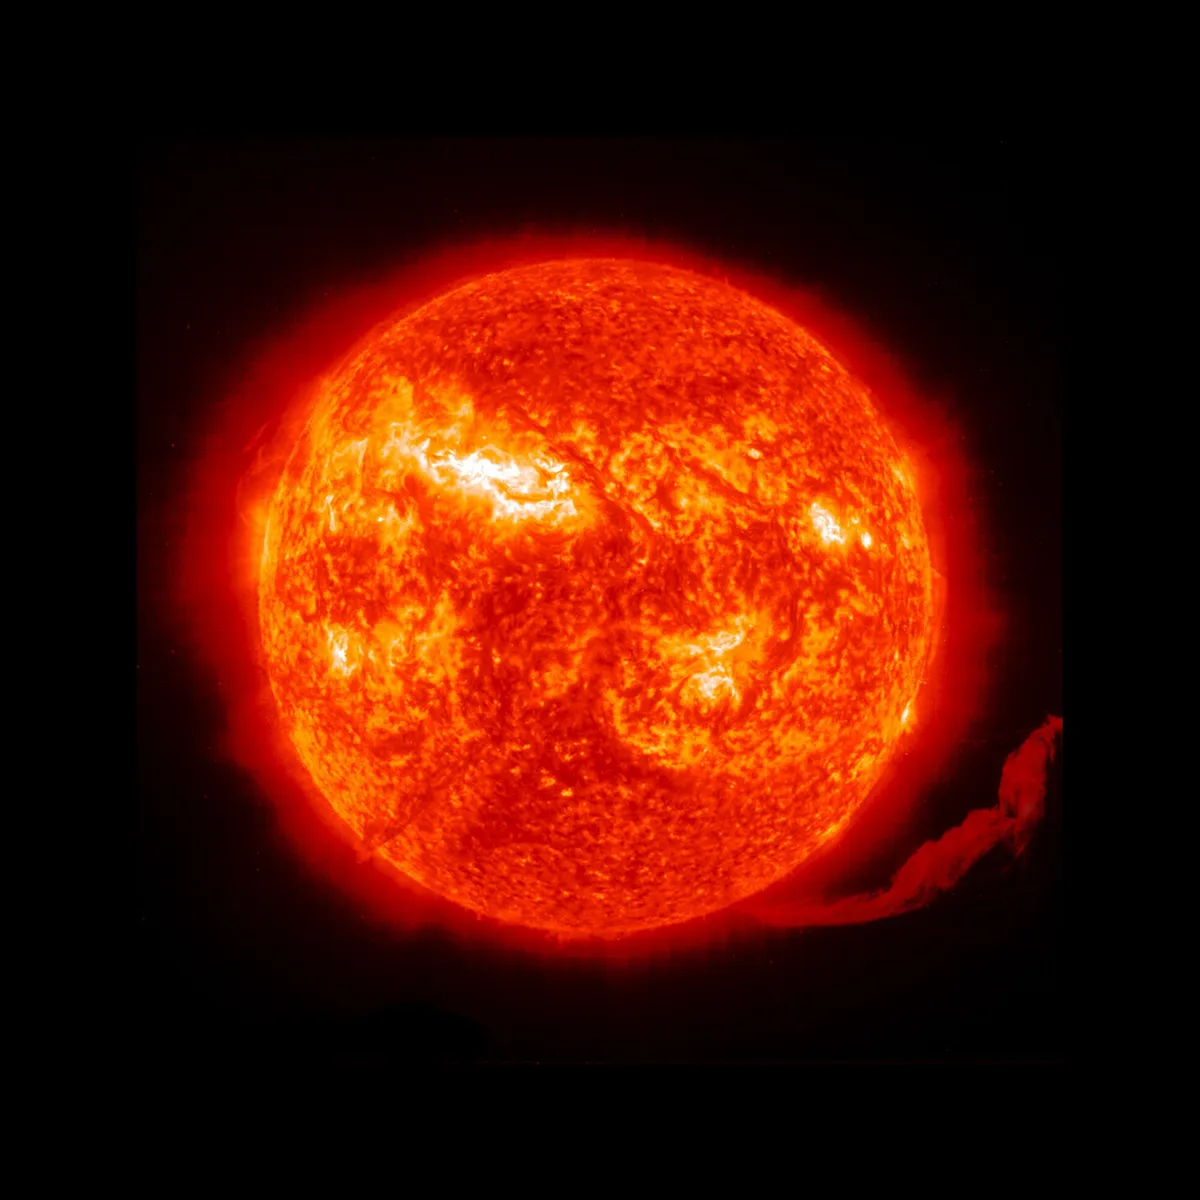 A solar eruption expels material from the surface of the sun.